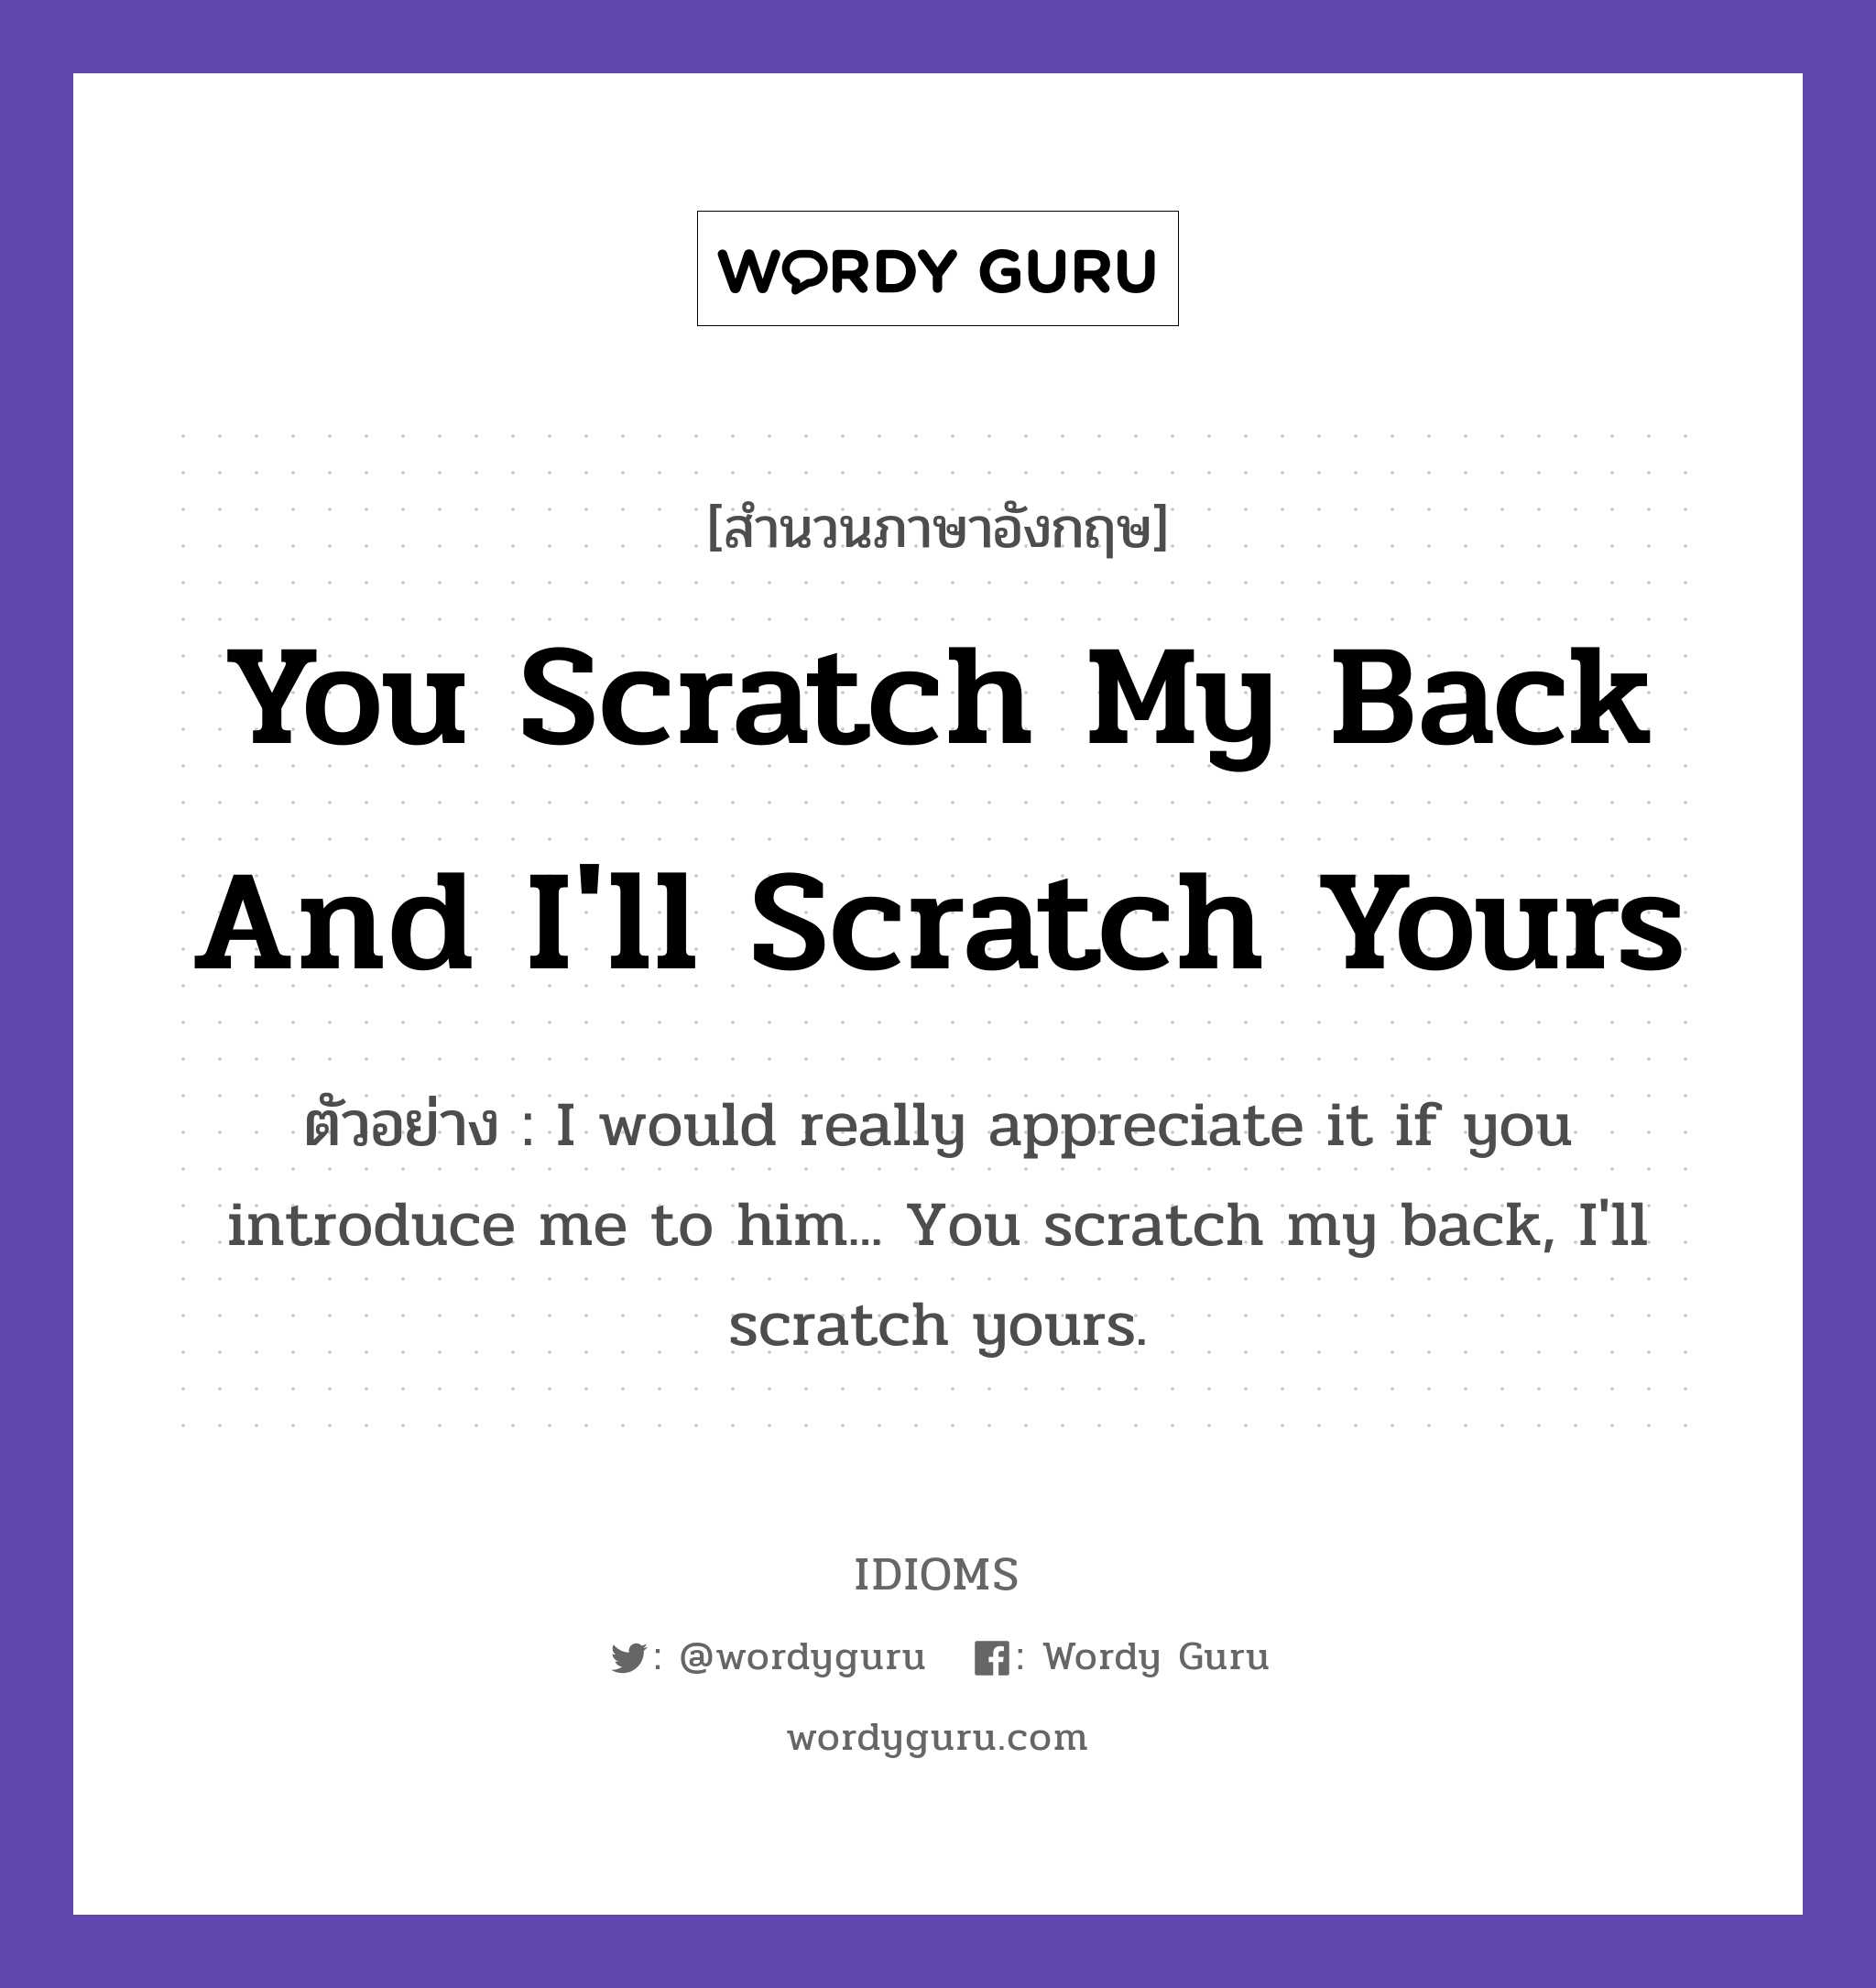 You Scratch My Back And I'll Scratch Yours แปลว่า?, สำนวนภาษาอังกฤษ You Scratch My Back And I'll Scratch Yours ตัวอย่าง I would really appreciate it if you introduce me to him... You scratch my back, I'll scratch yours.